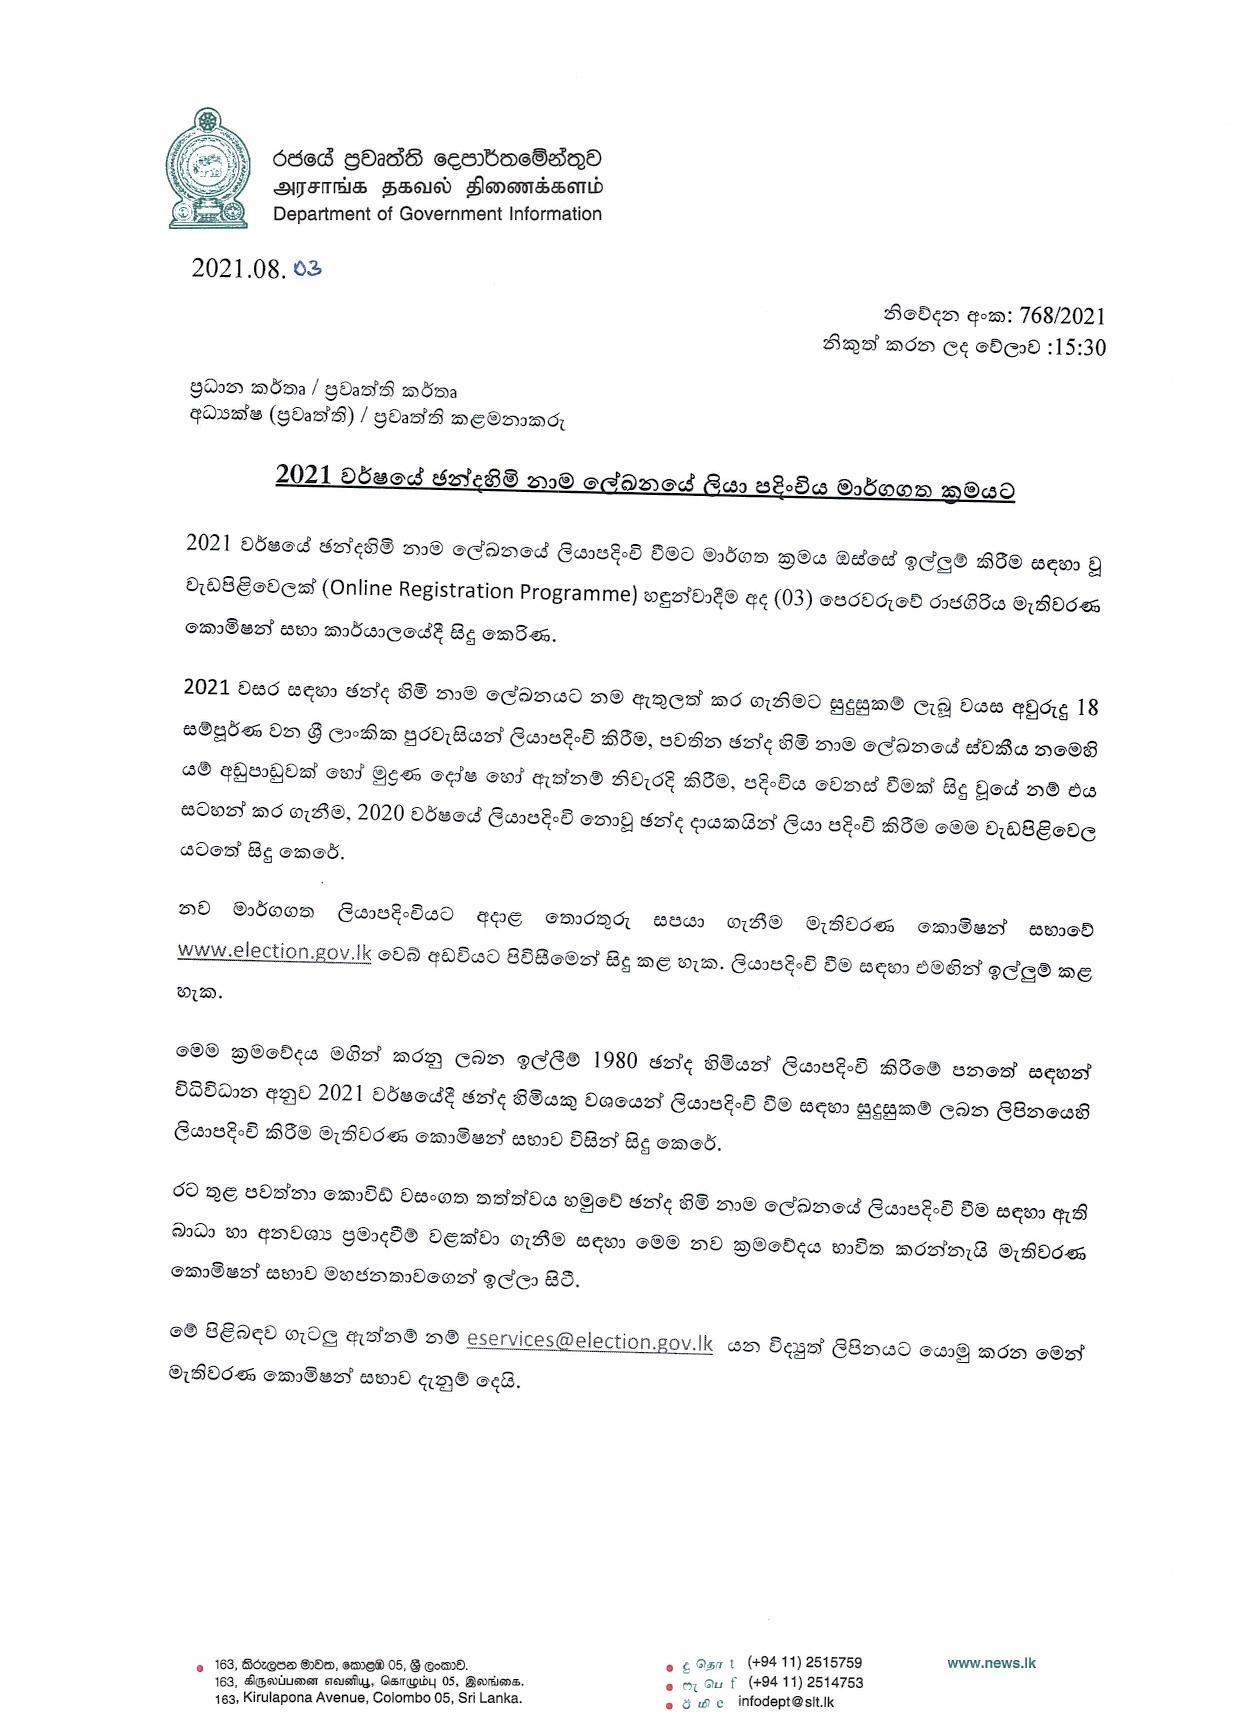 Press Release from Election Commission page 001